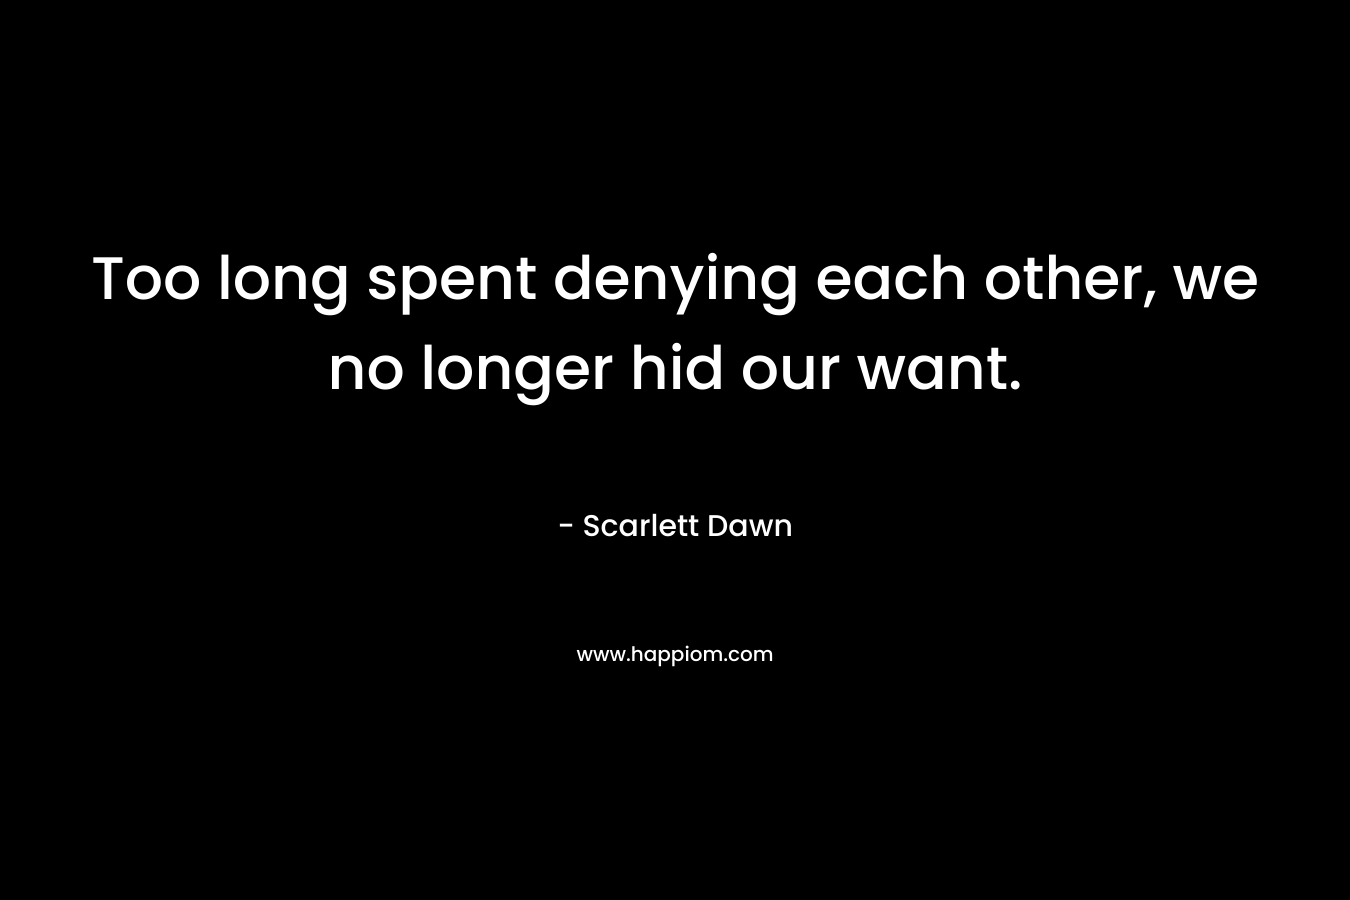 Too long spent denying each other, we no longer hid our want. – Scarlett Dawn